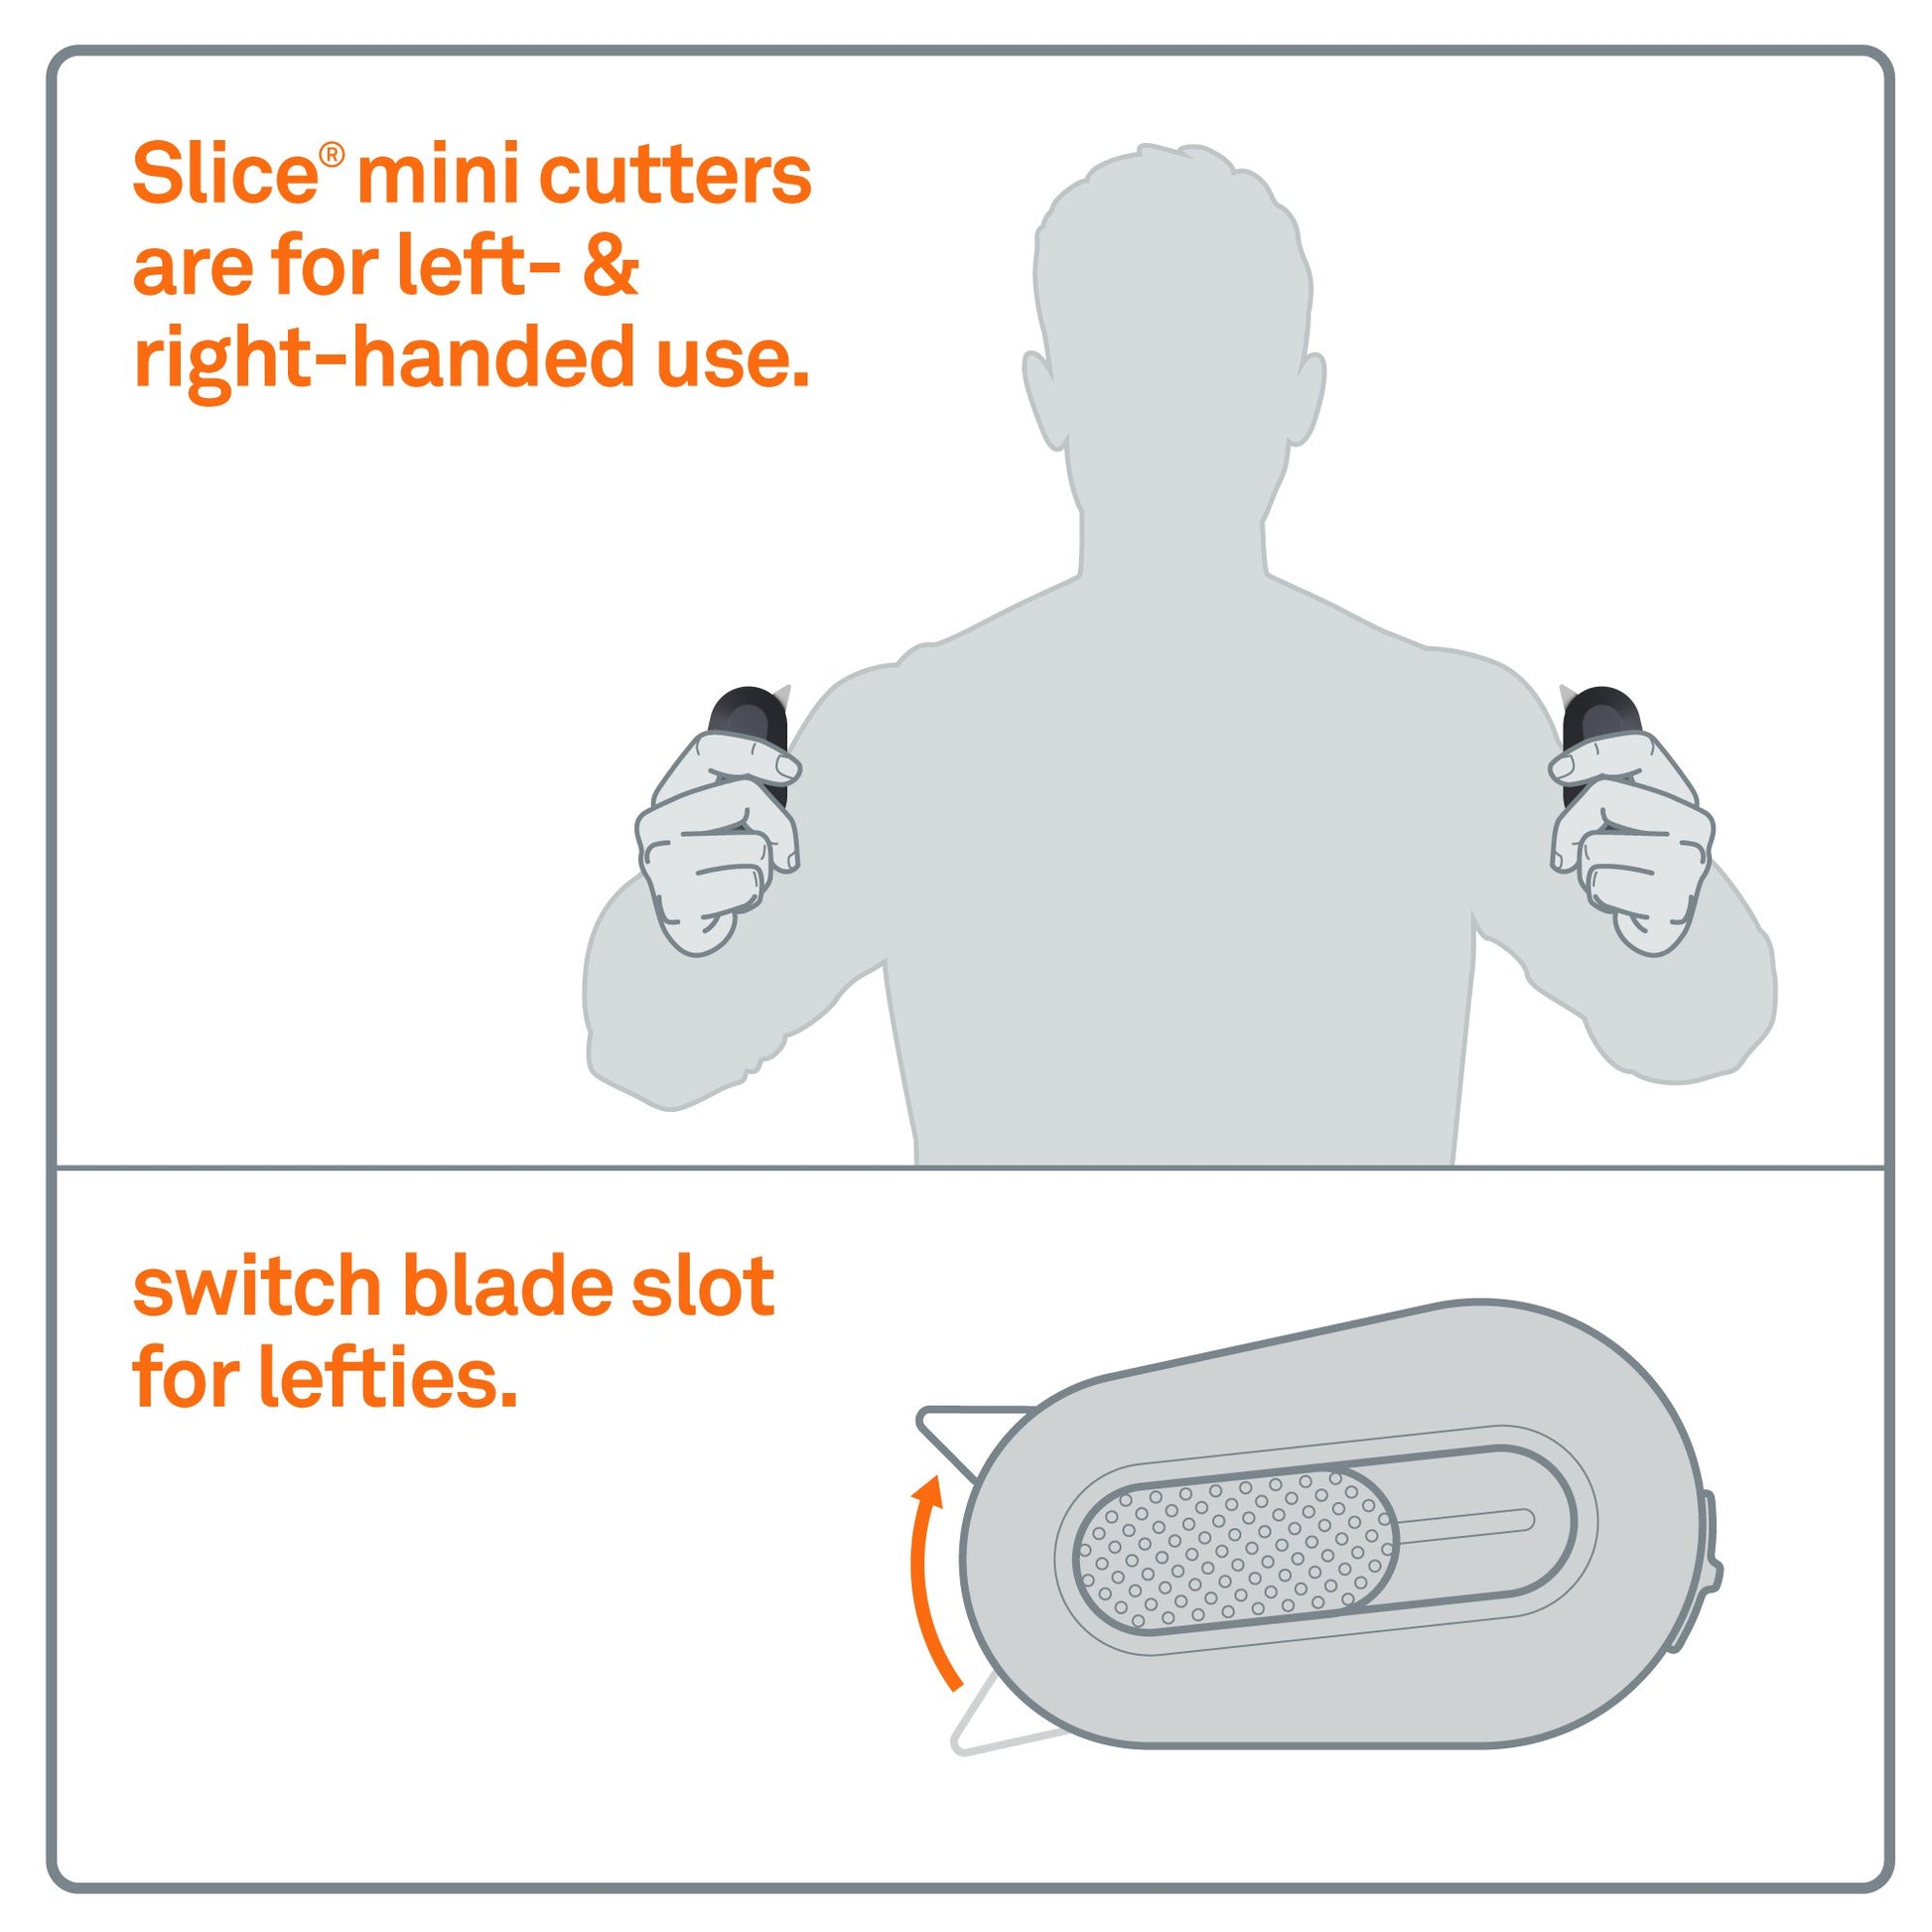 Slice Manual Mini Cutter Length: 62 mm:Facility Safety and Maintenance